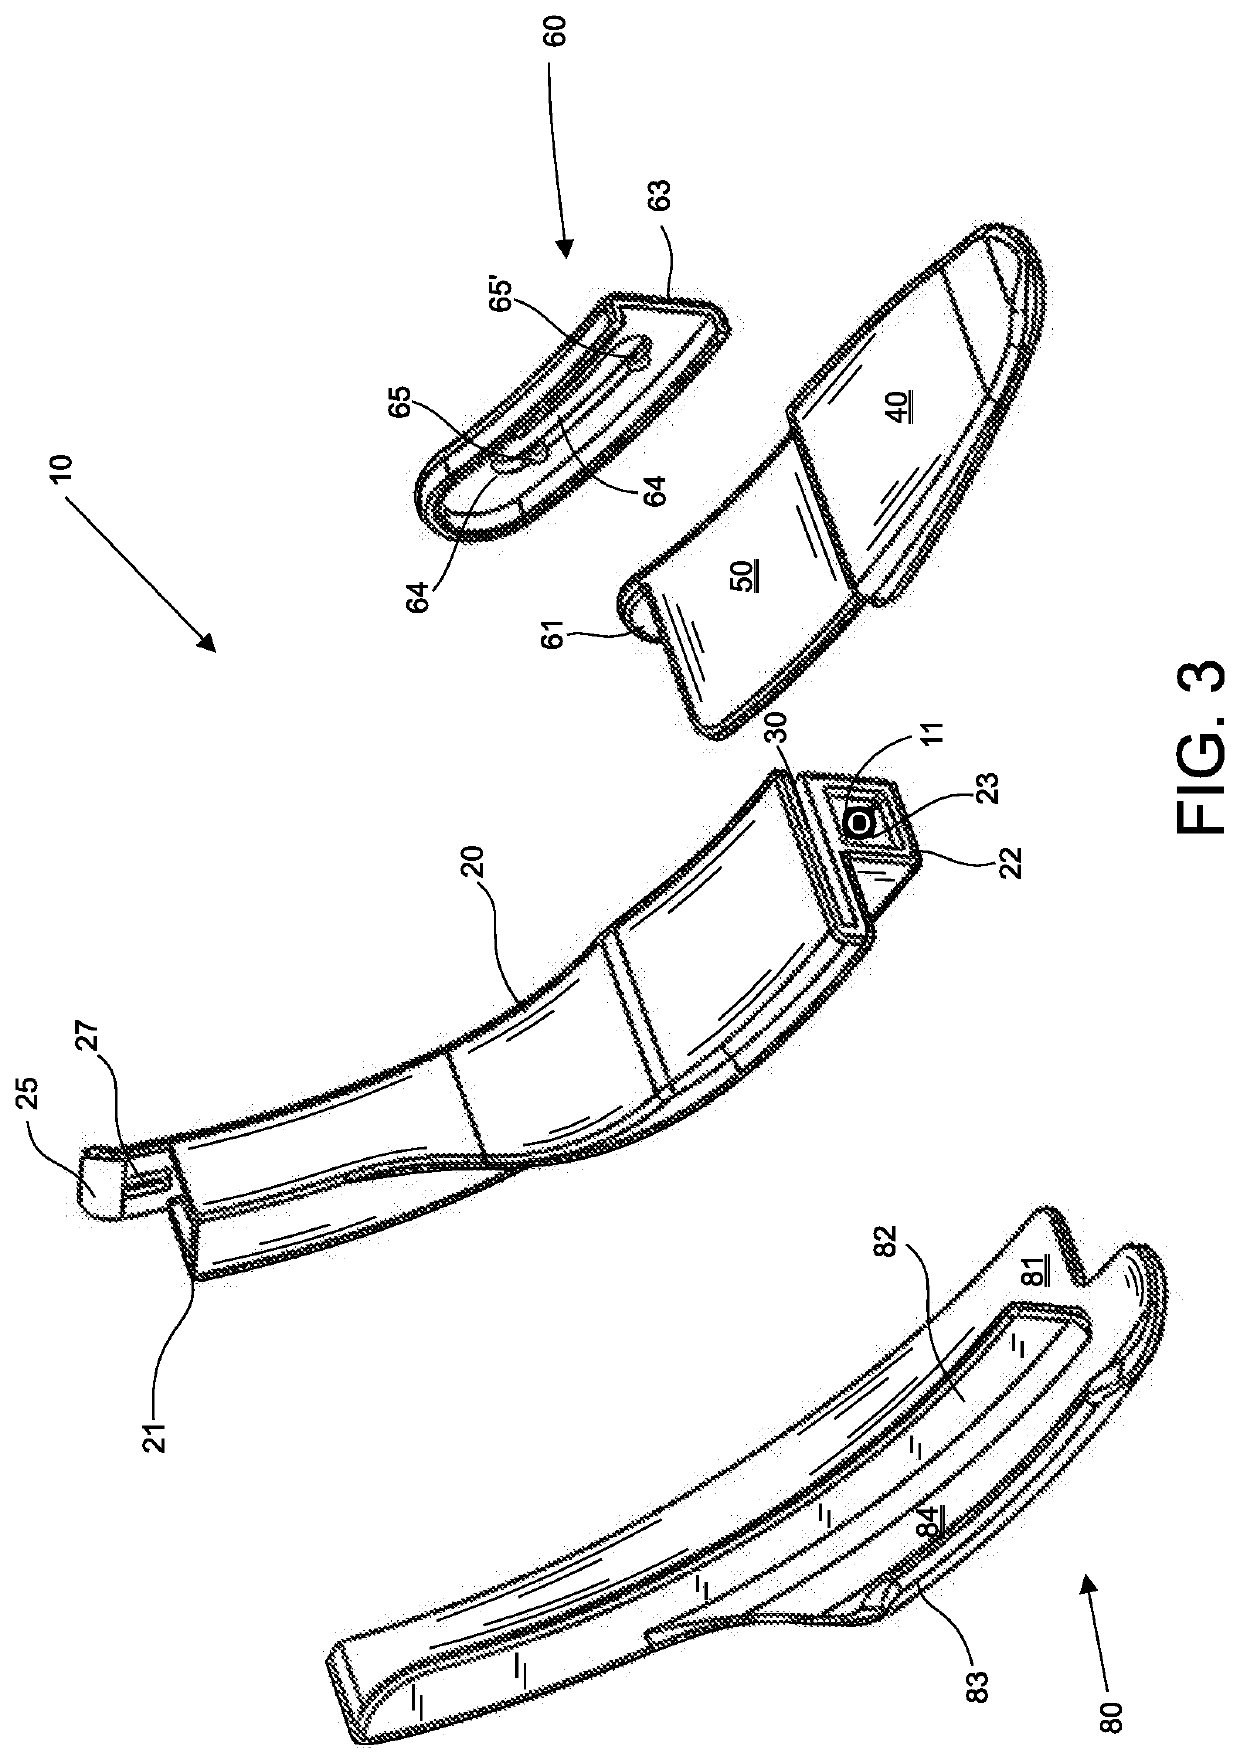 Blade for a video laryngoscope with extendable tip